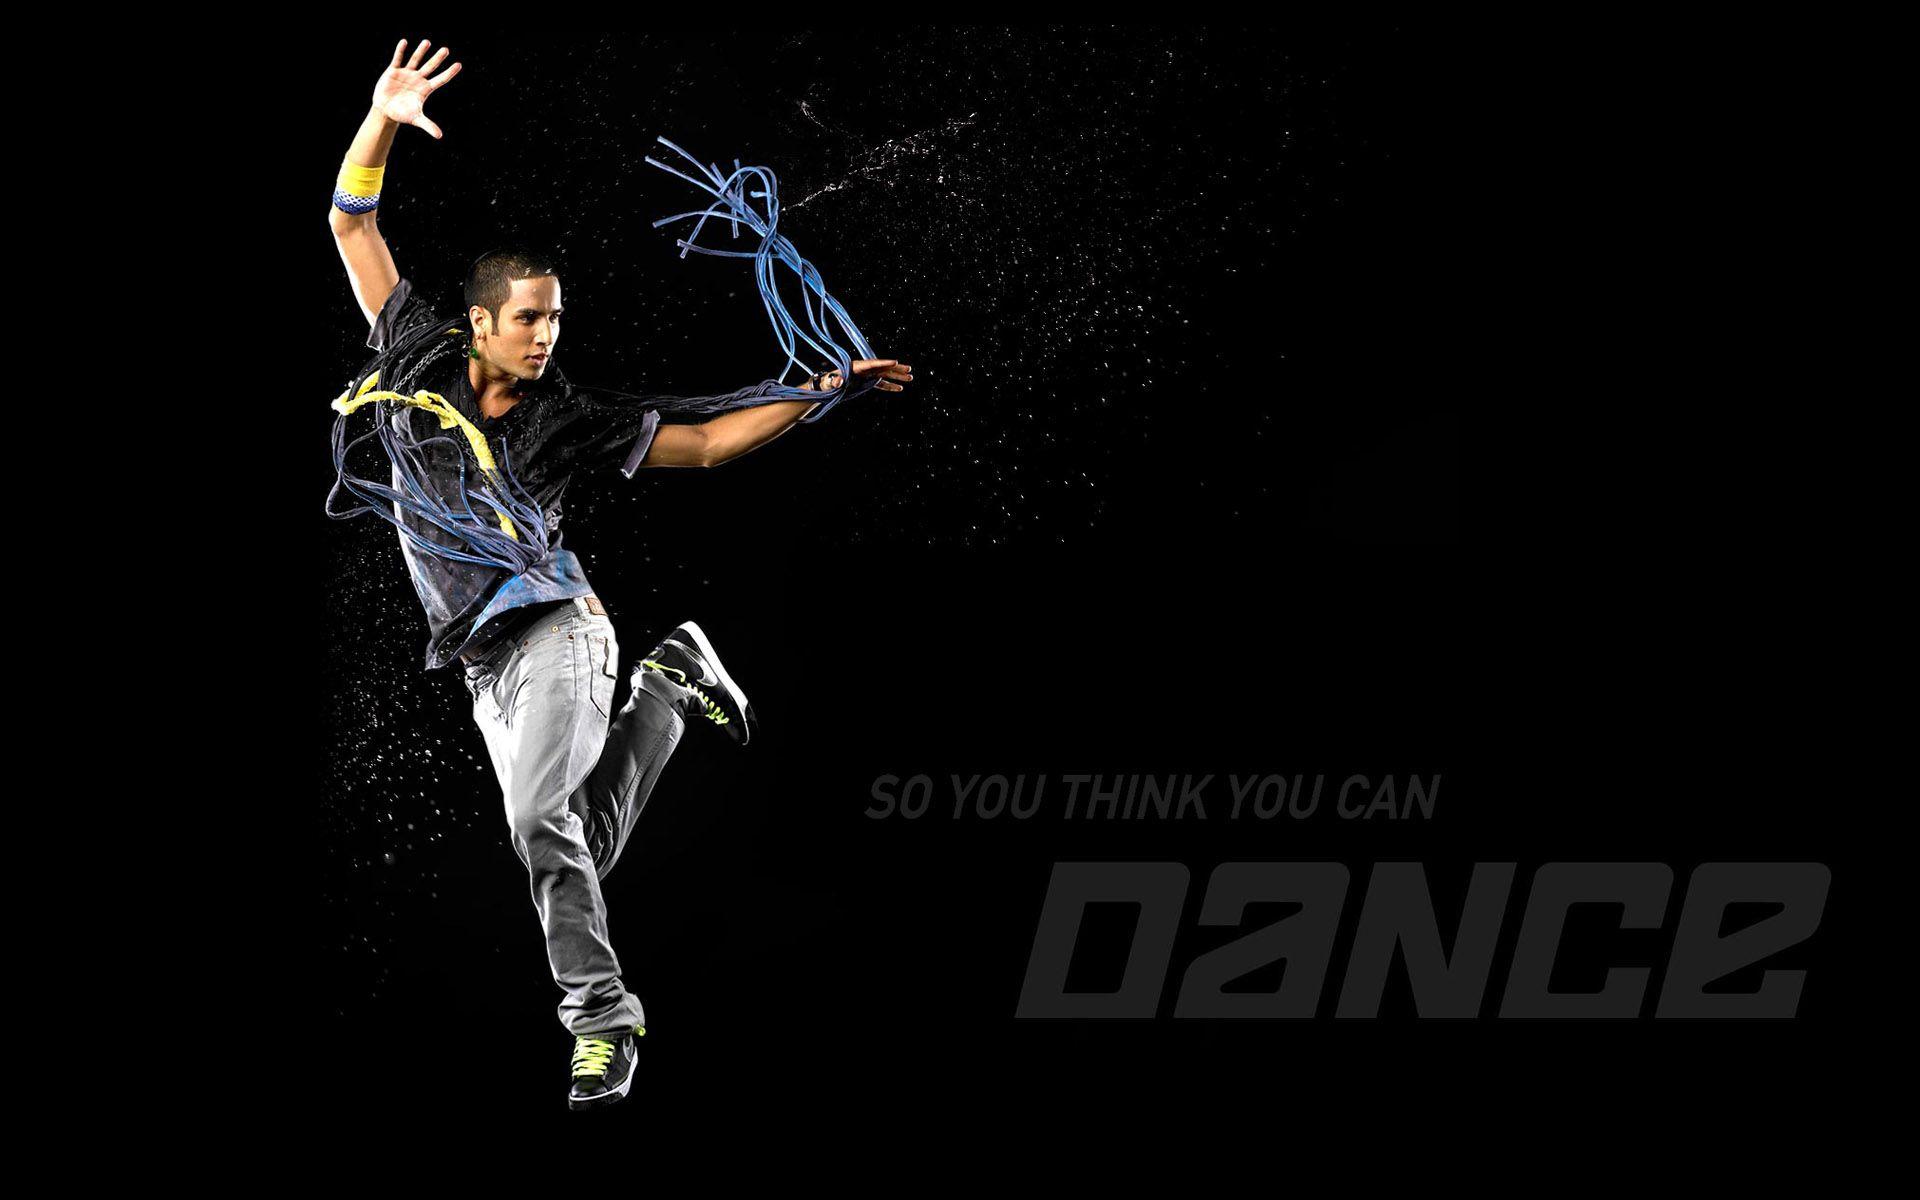 So You Think You Can Dance Full HD Wallpaper